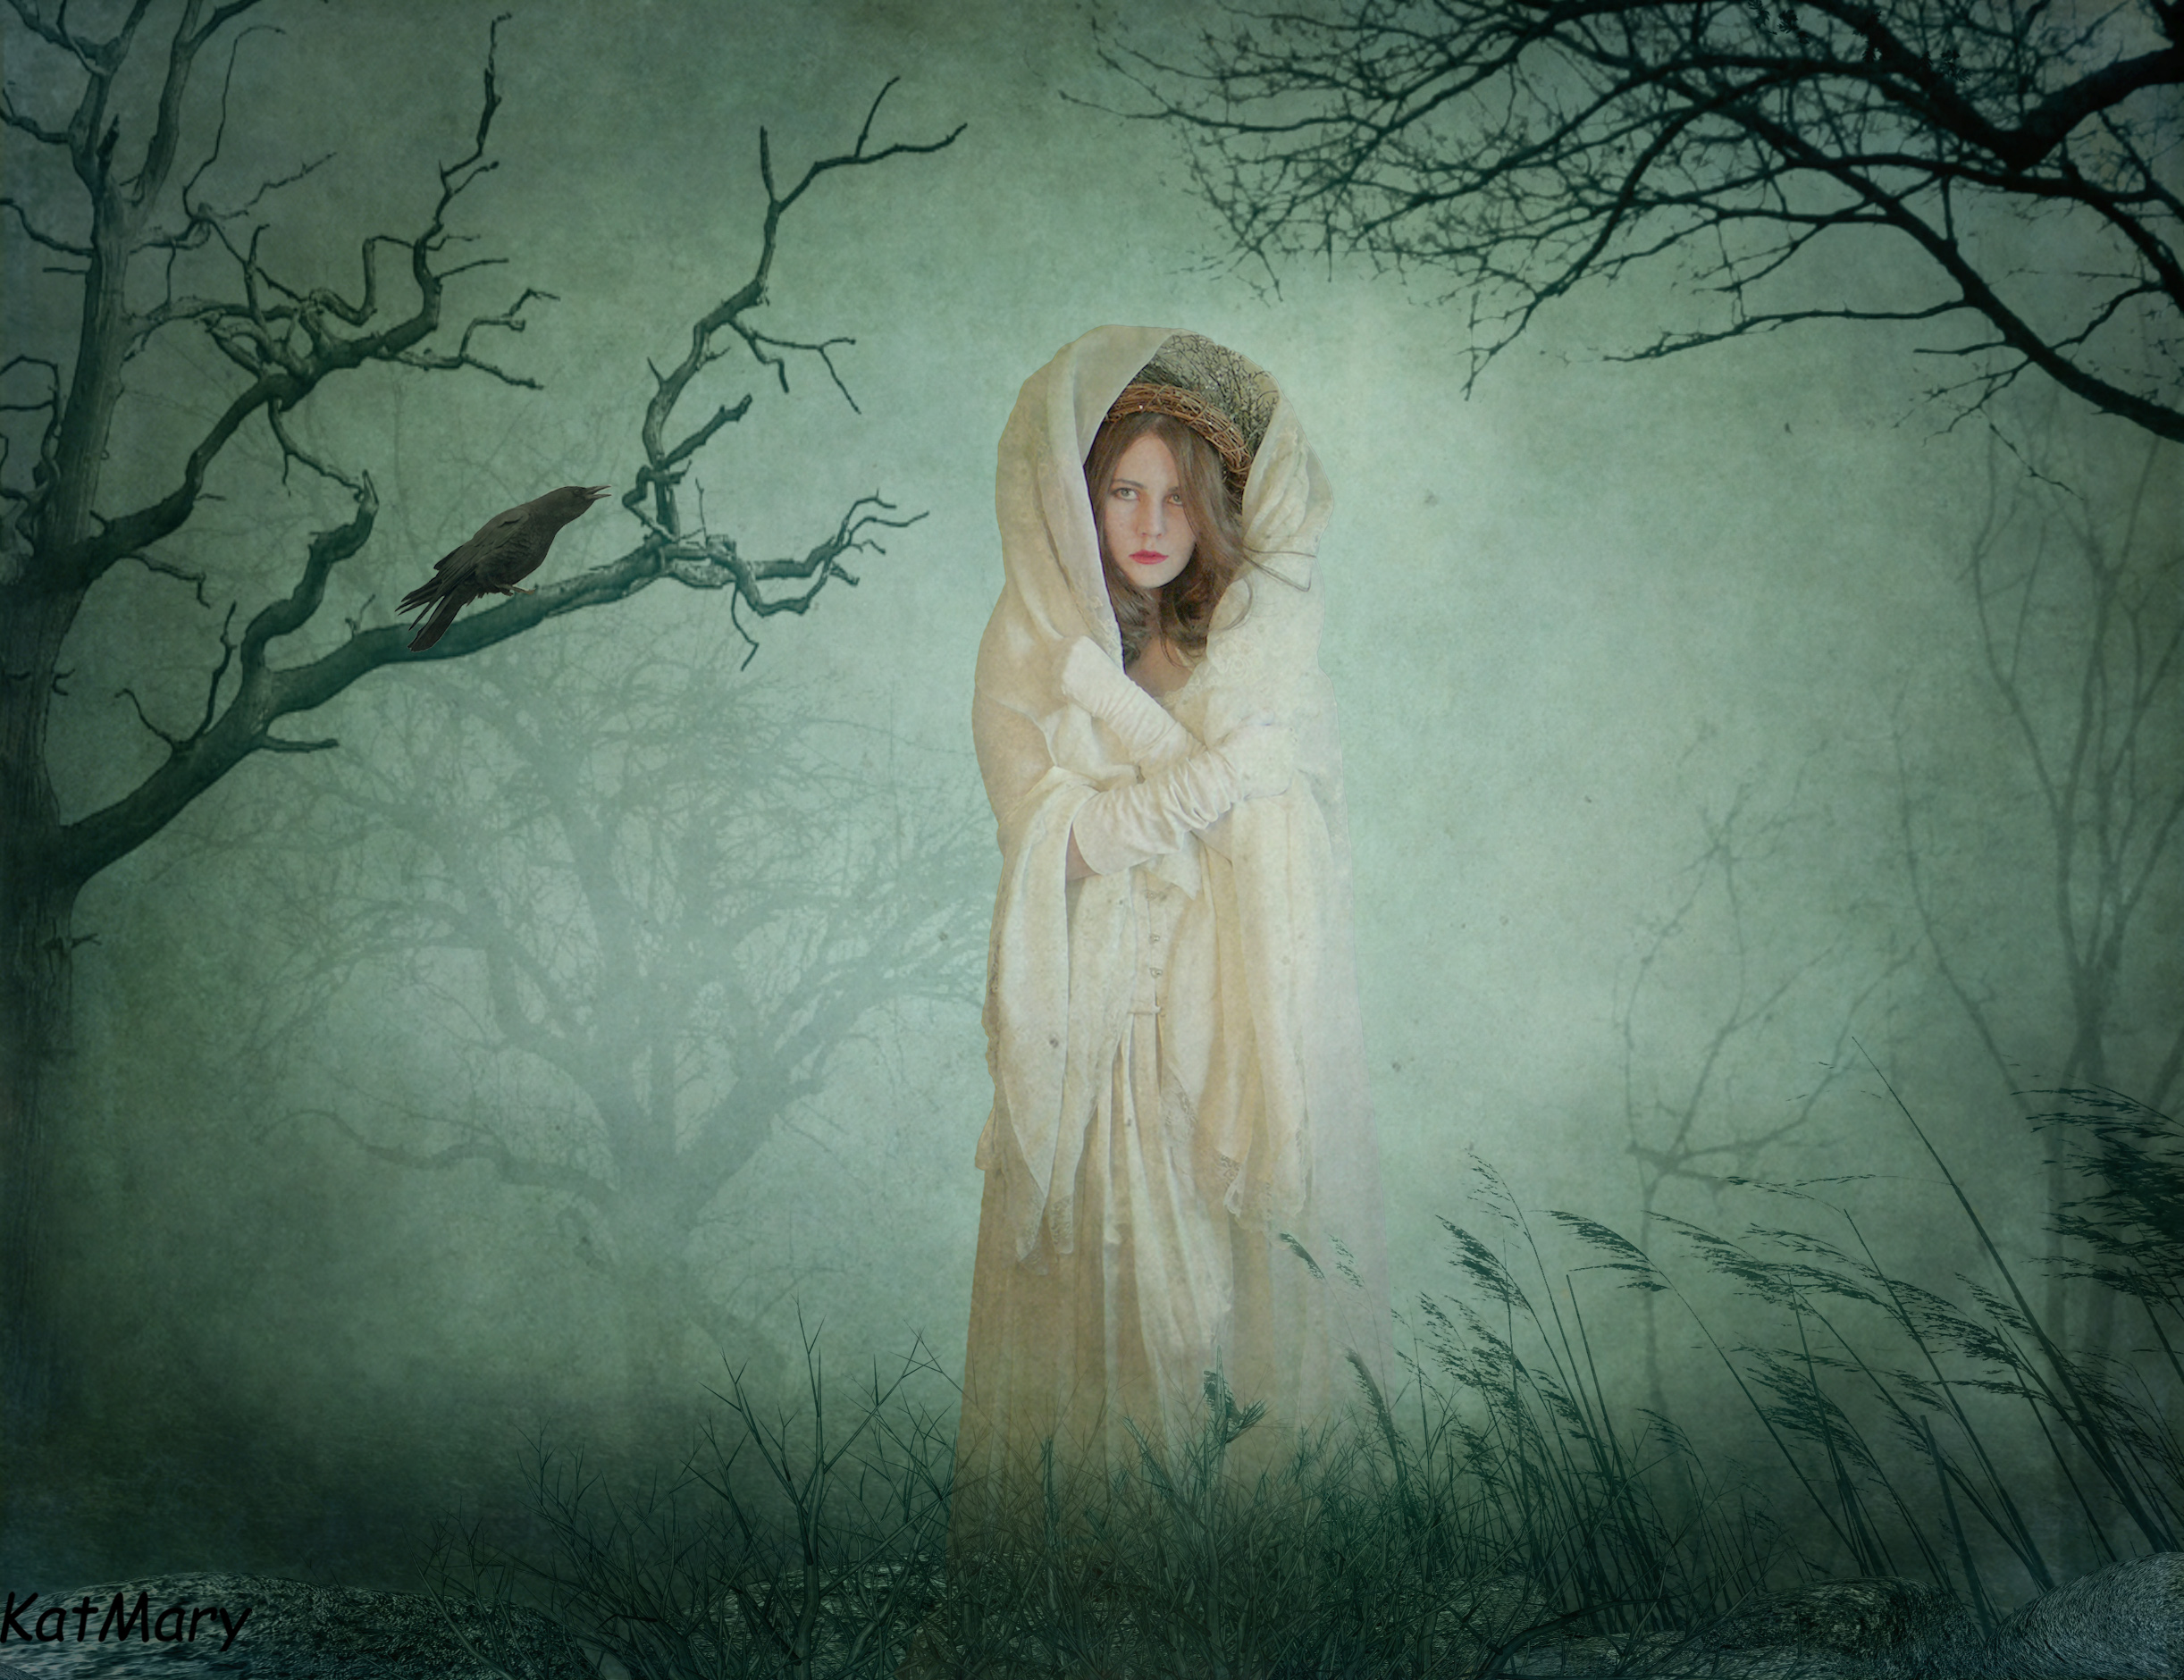 The ghost in the woods by katmary @ flickr (Published under Creative Commons)